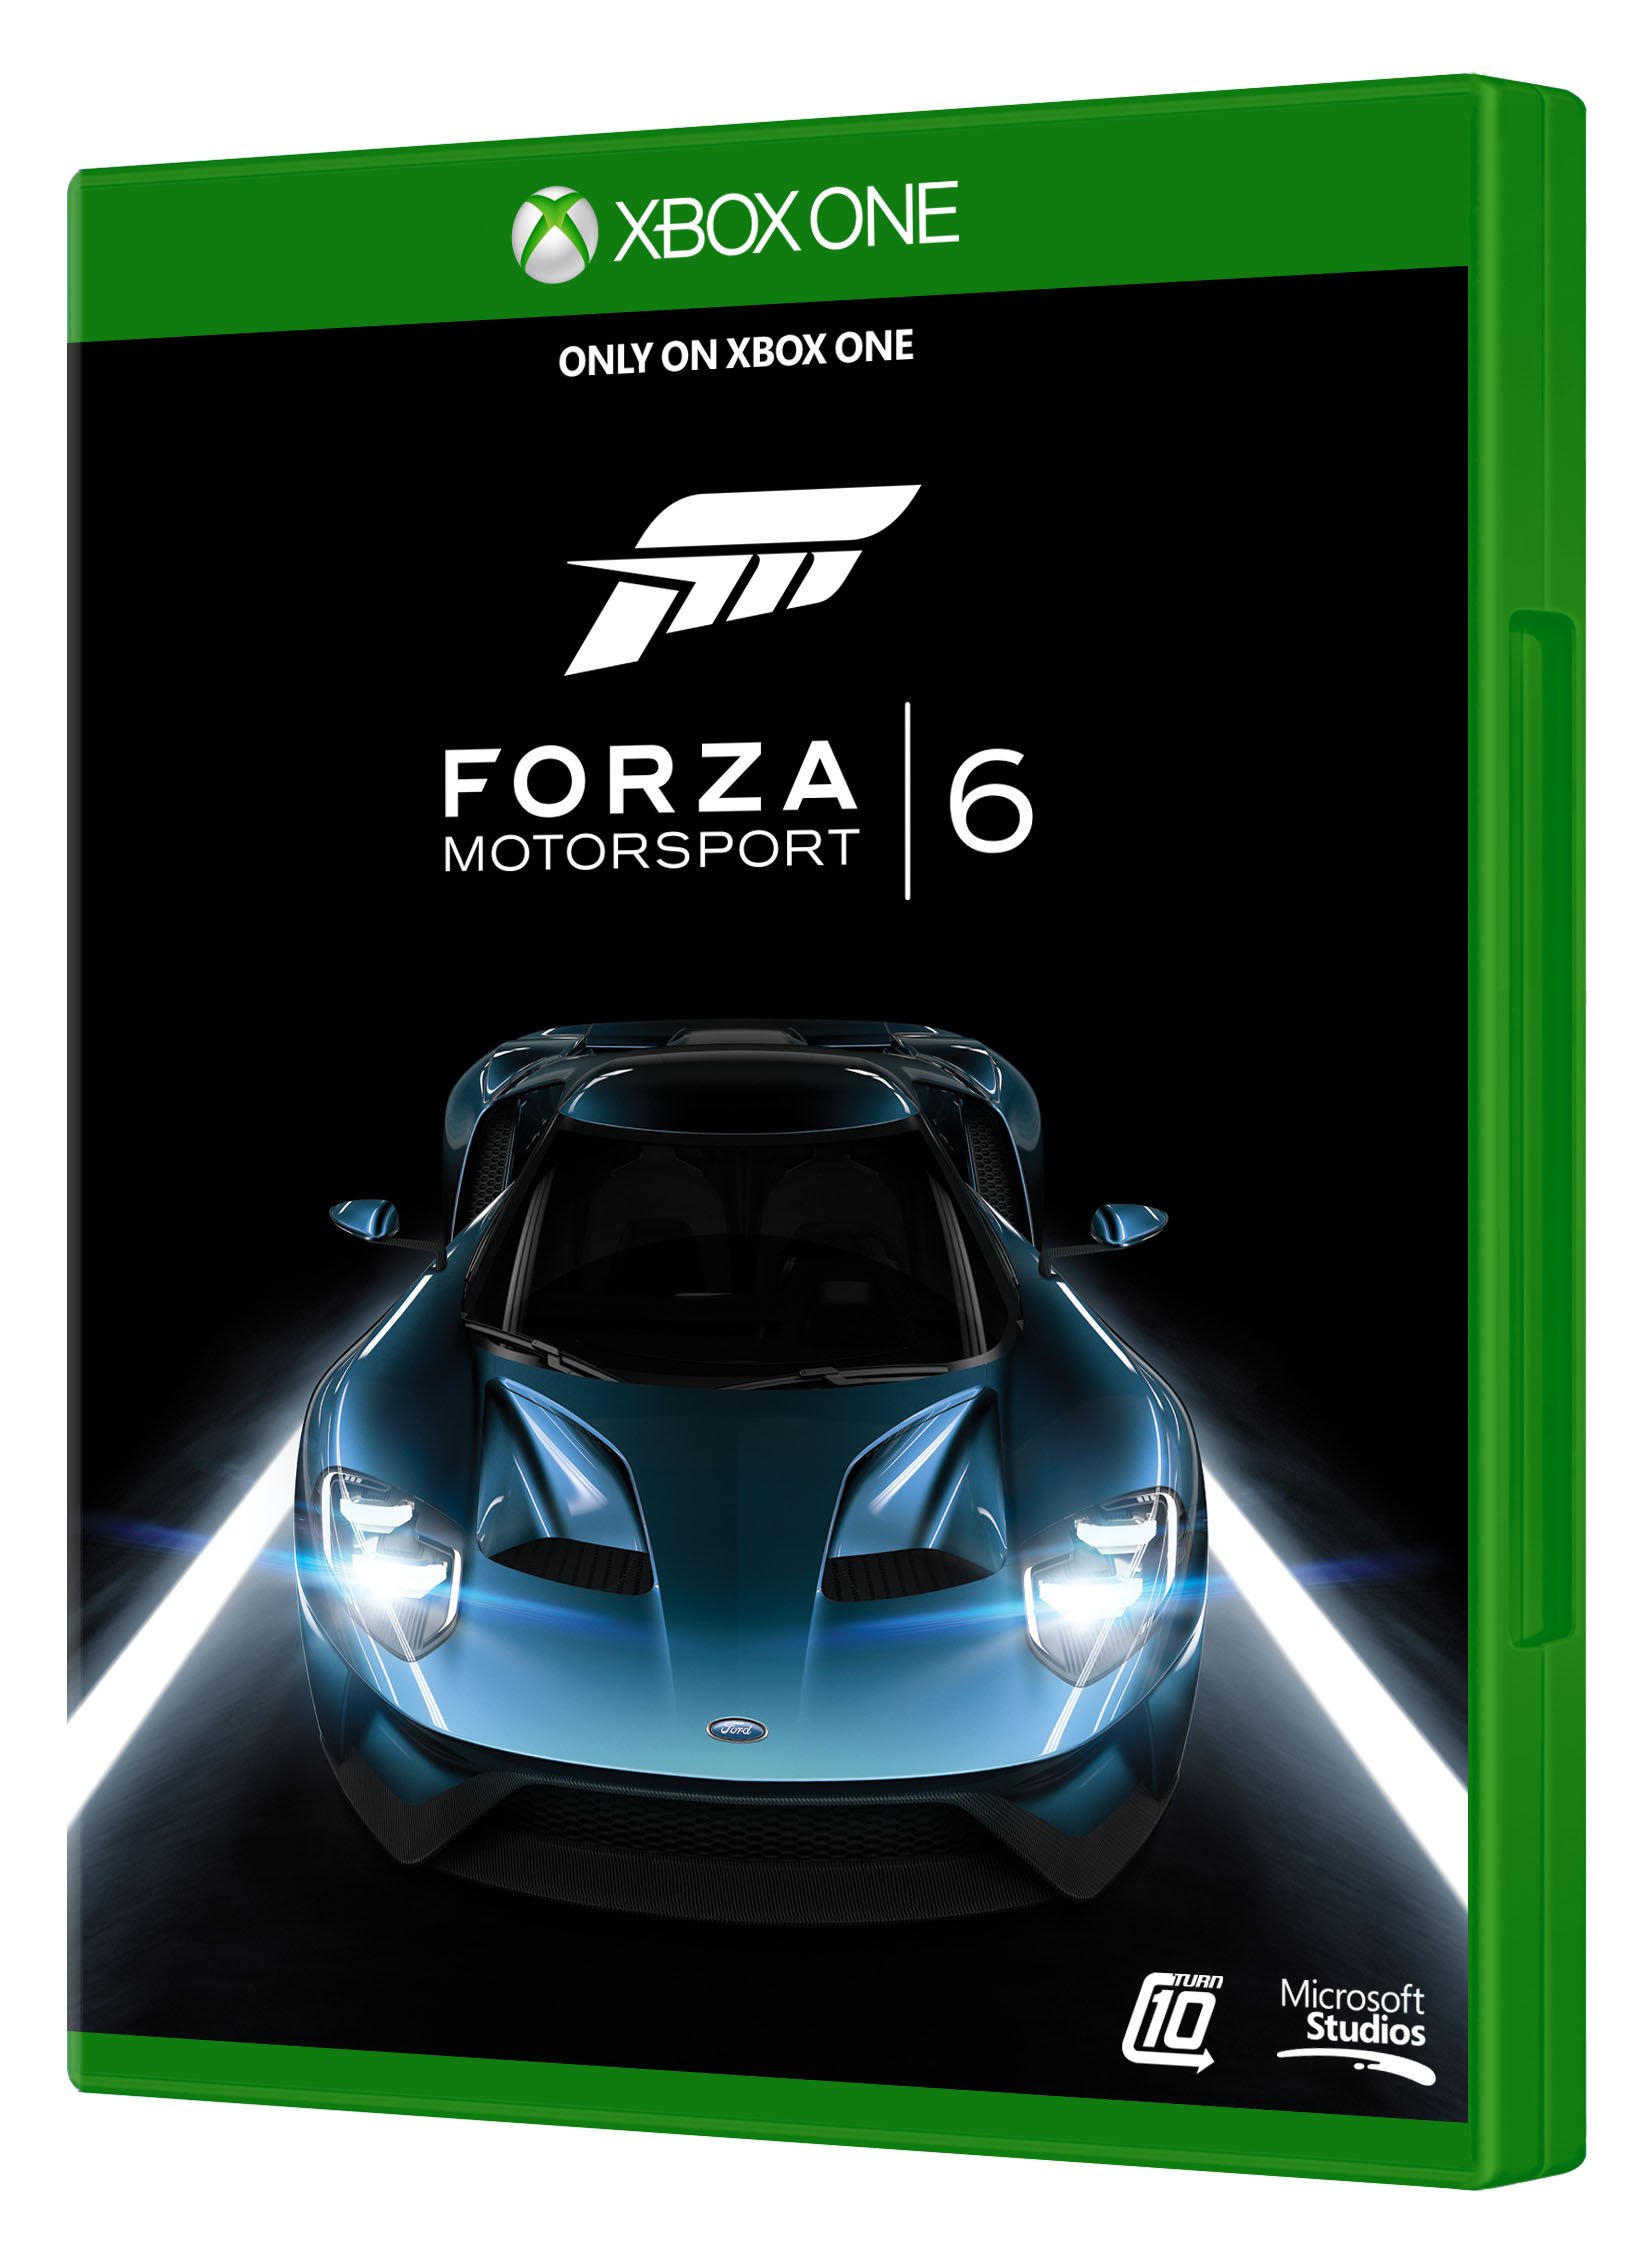 Forza Motorsport 6 Races Onto Xbox One on September 15 - Xbox Wire